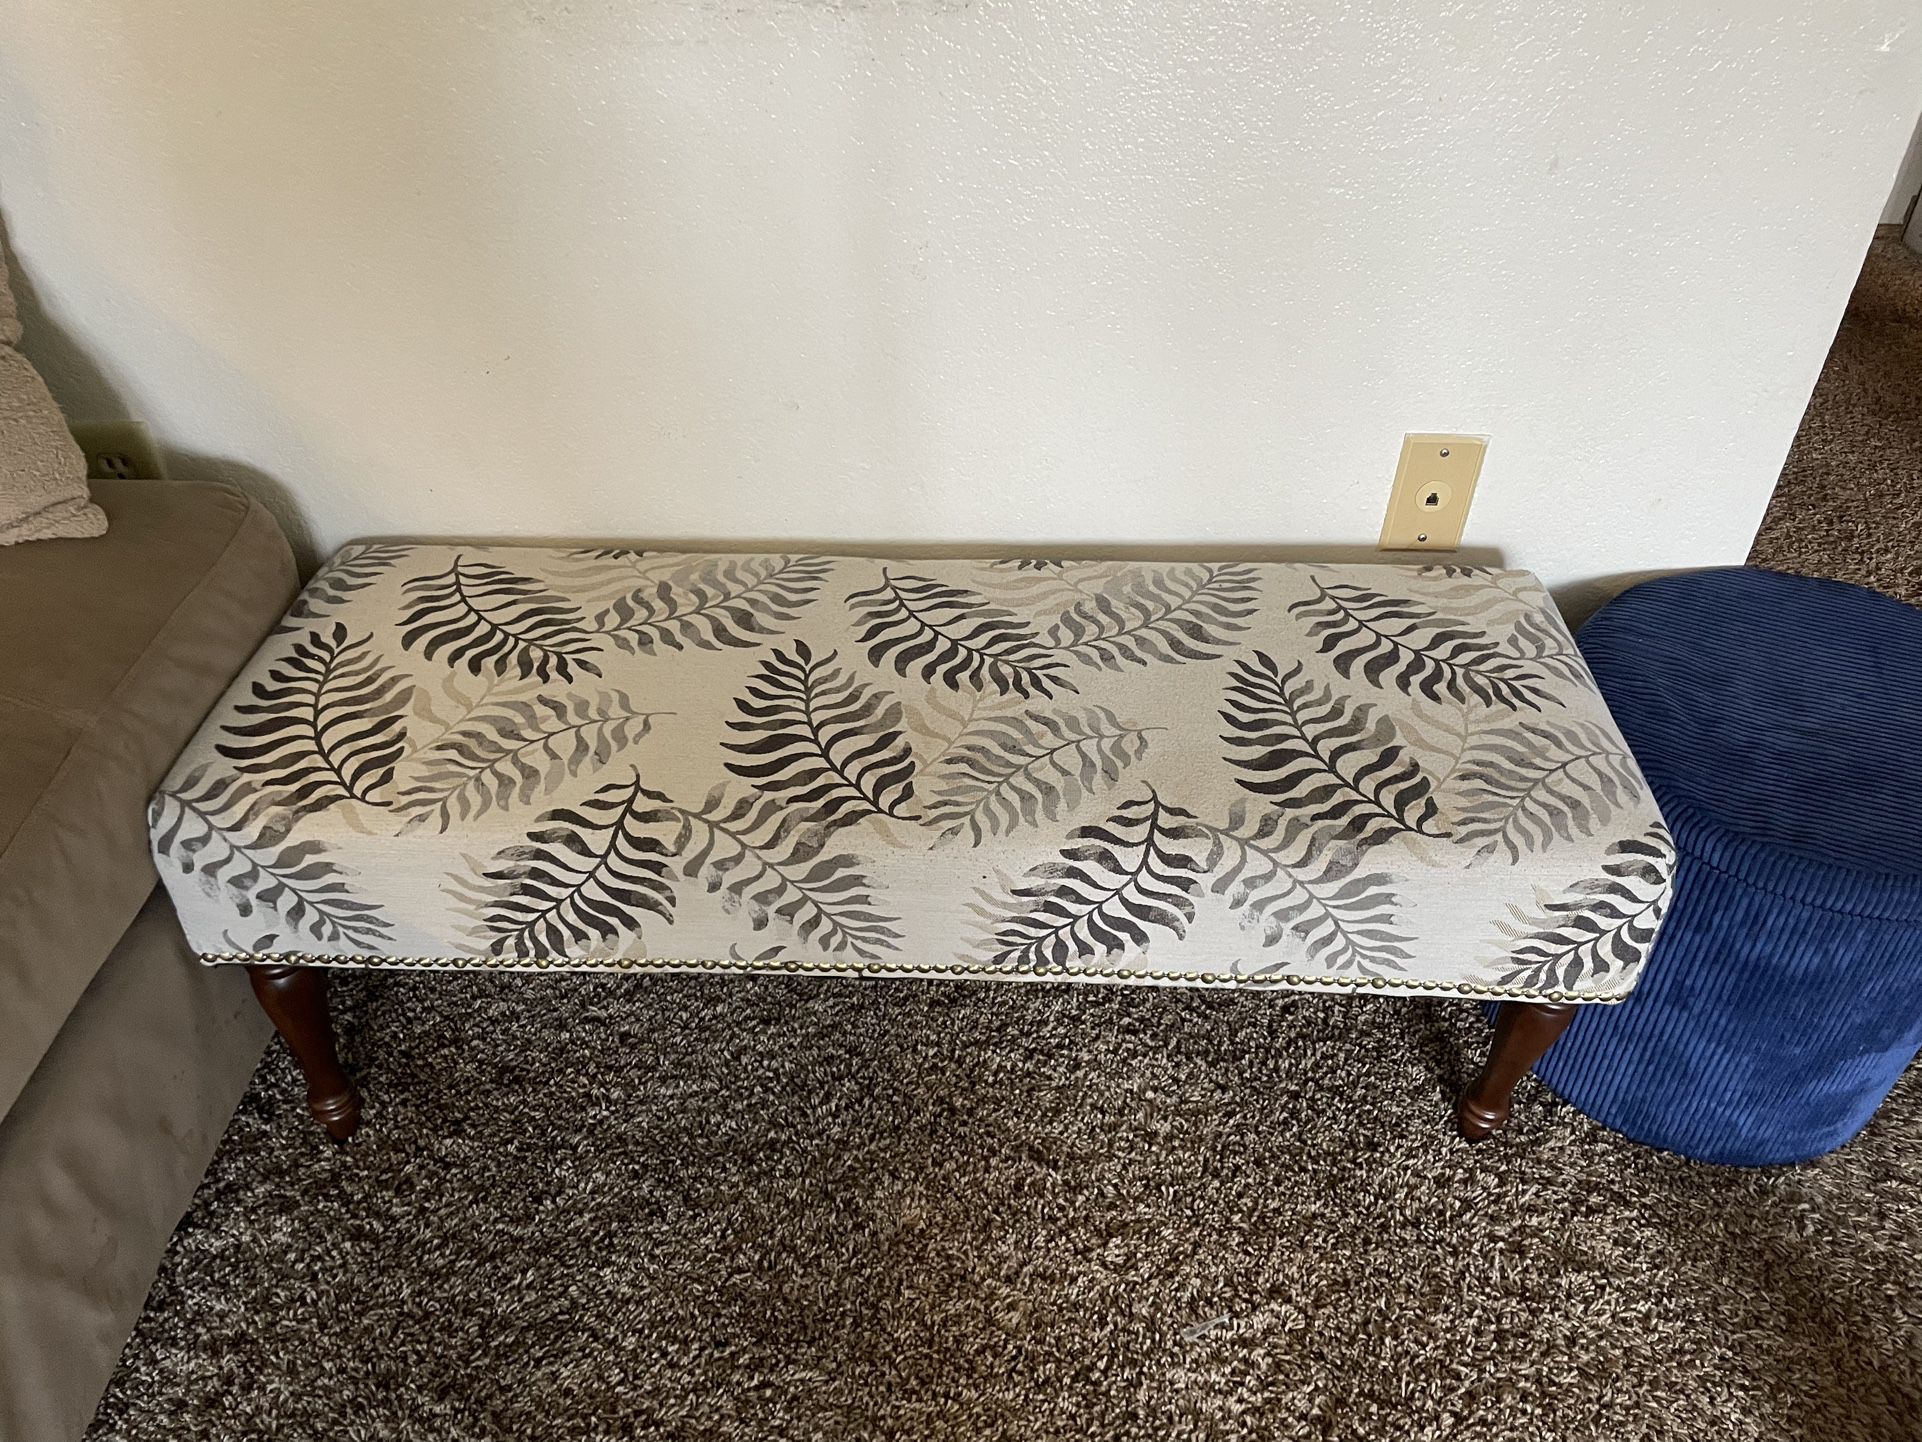 Floral Bench And Felt Storage Container